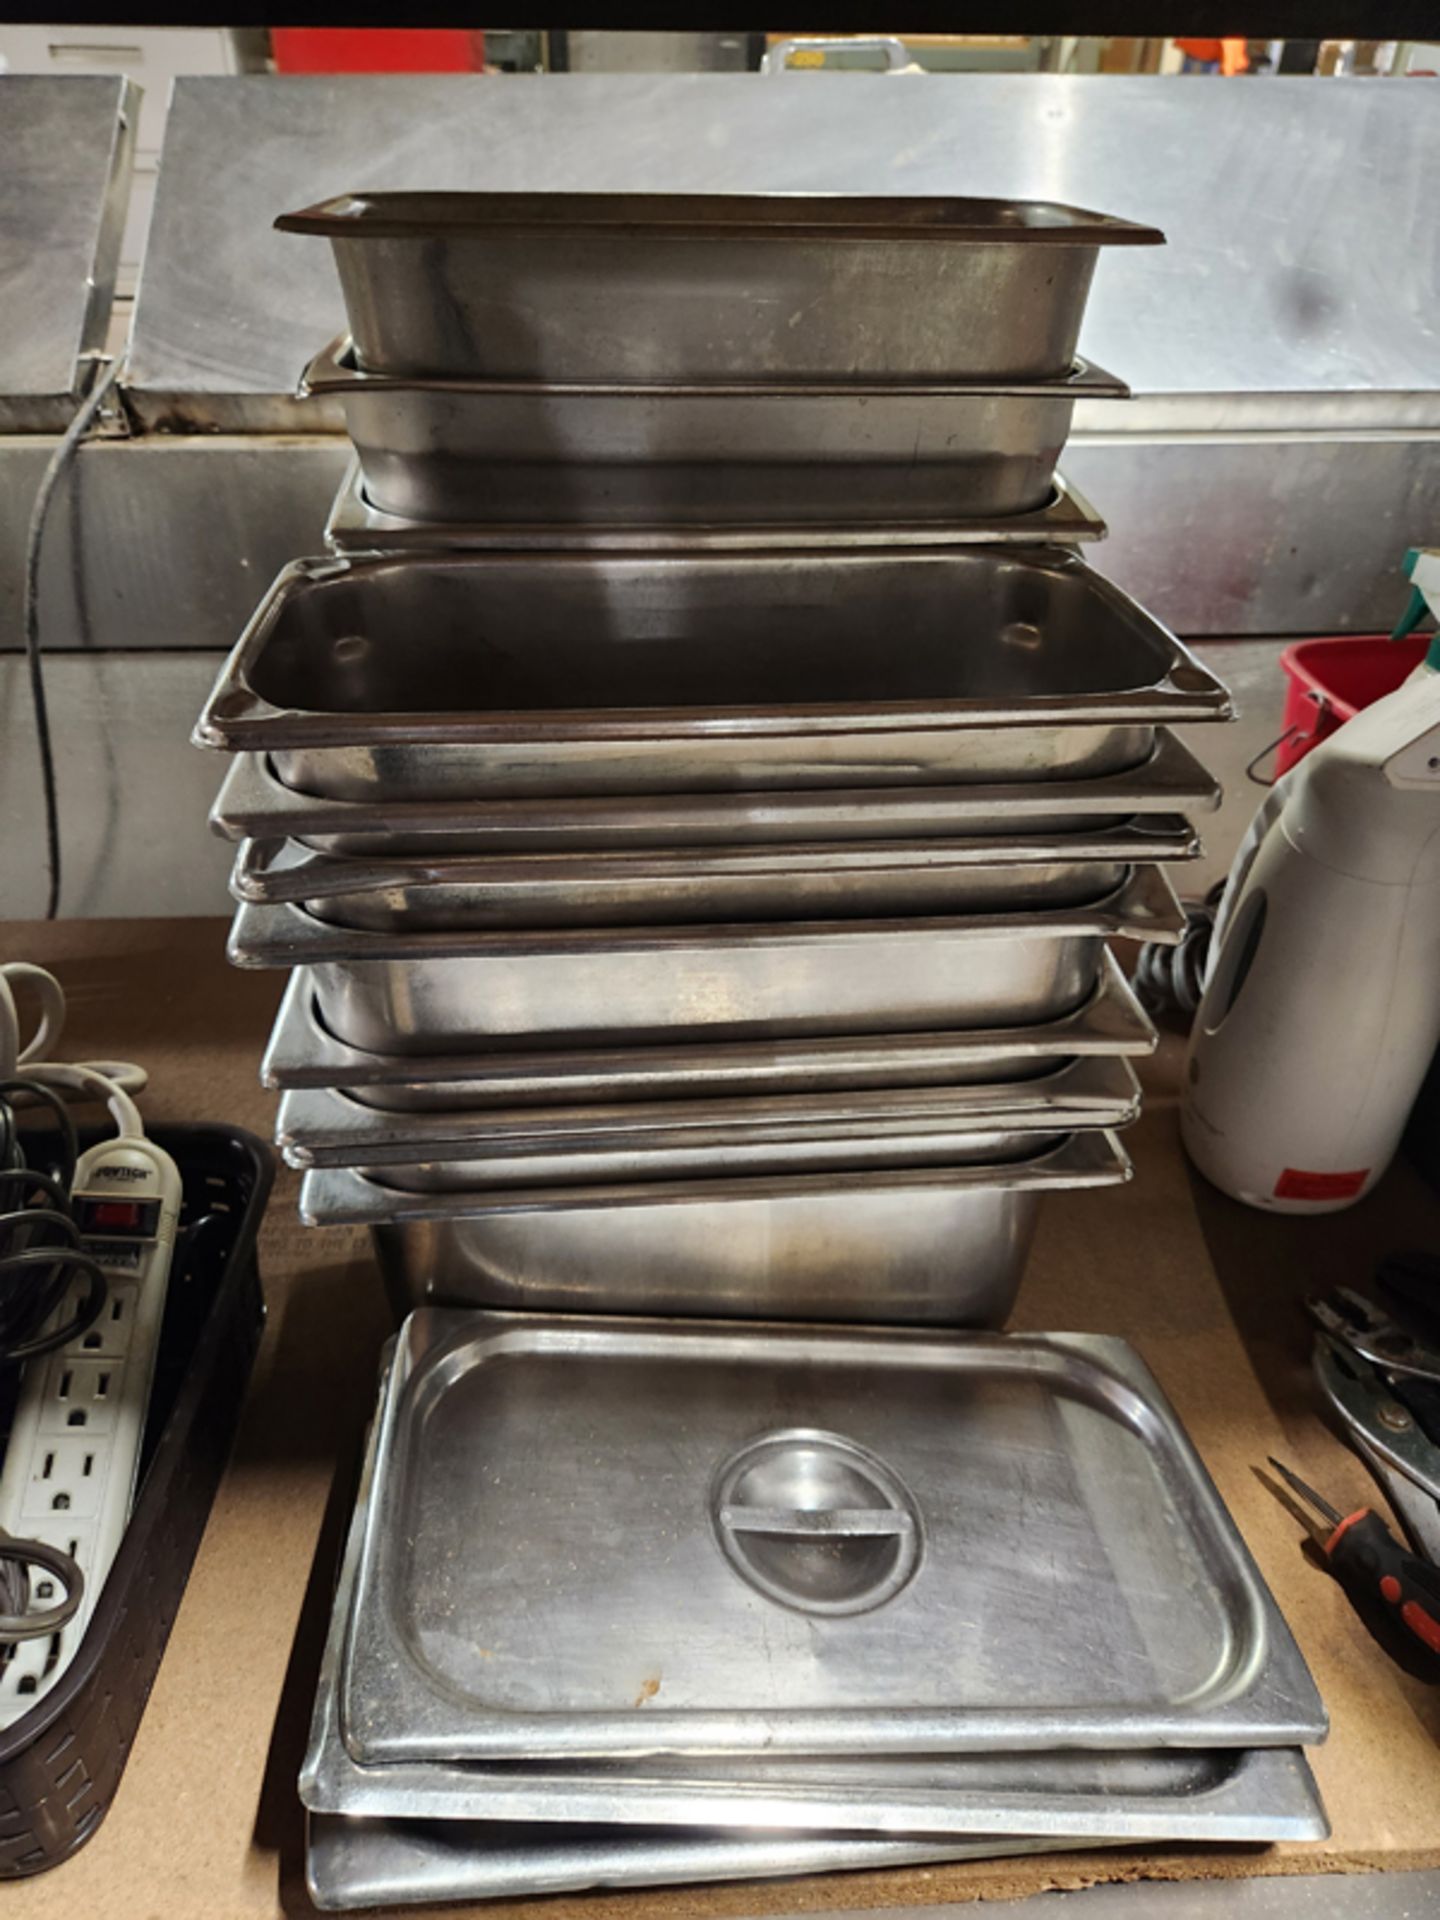 20 STAINLESS INSERT PANS WITH 4 LIDS - Image 3 of 3